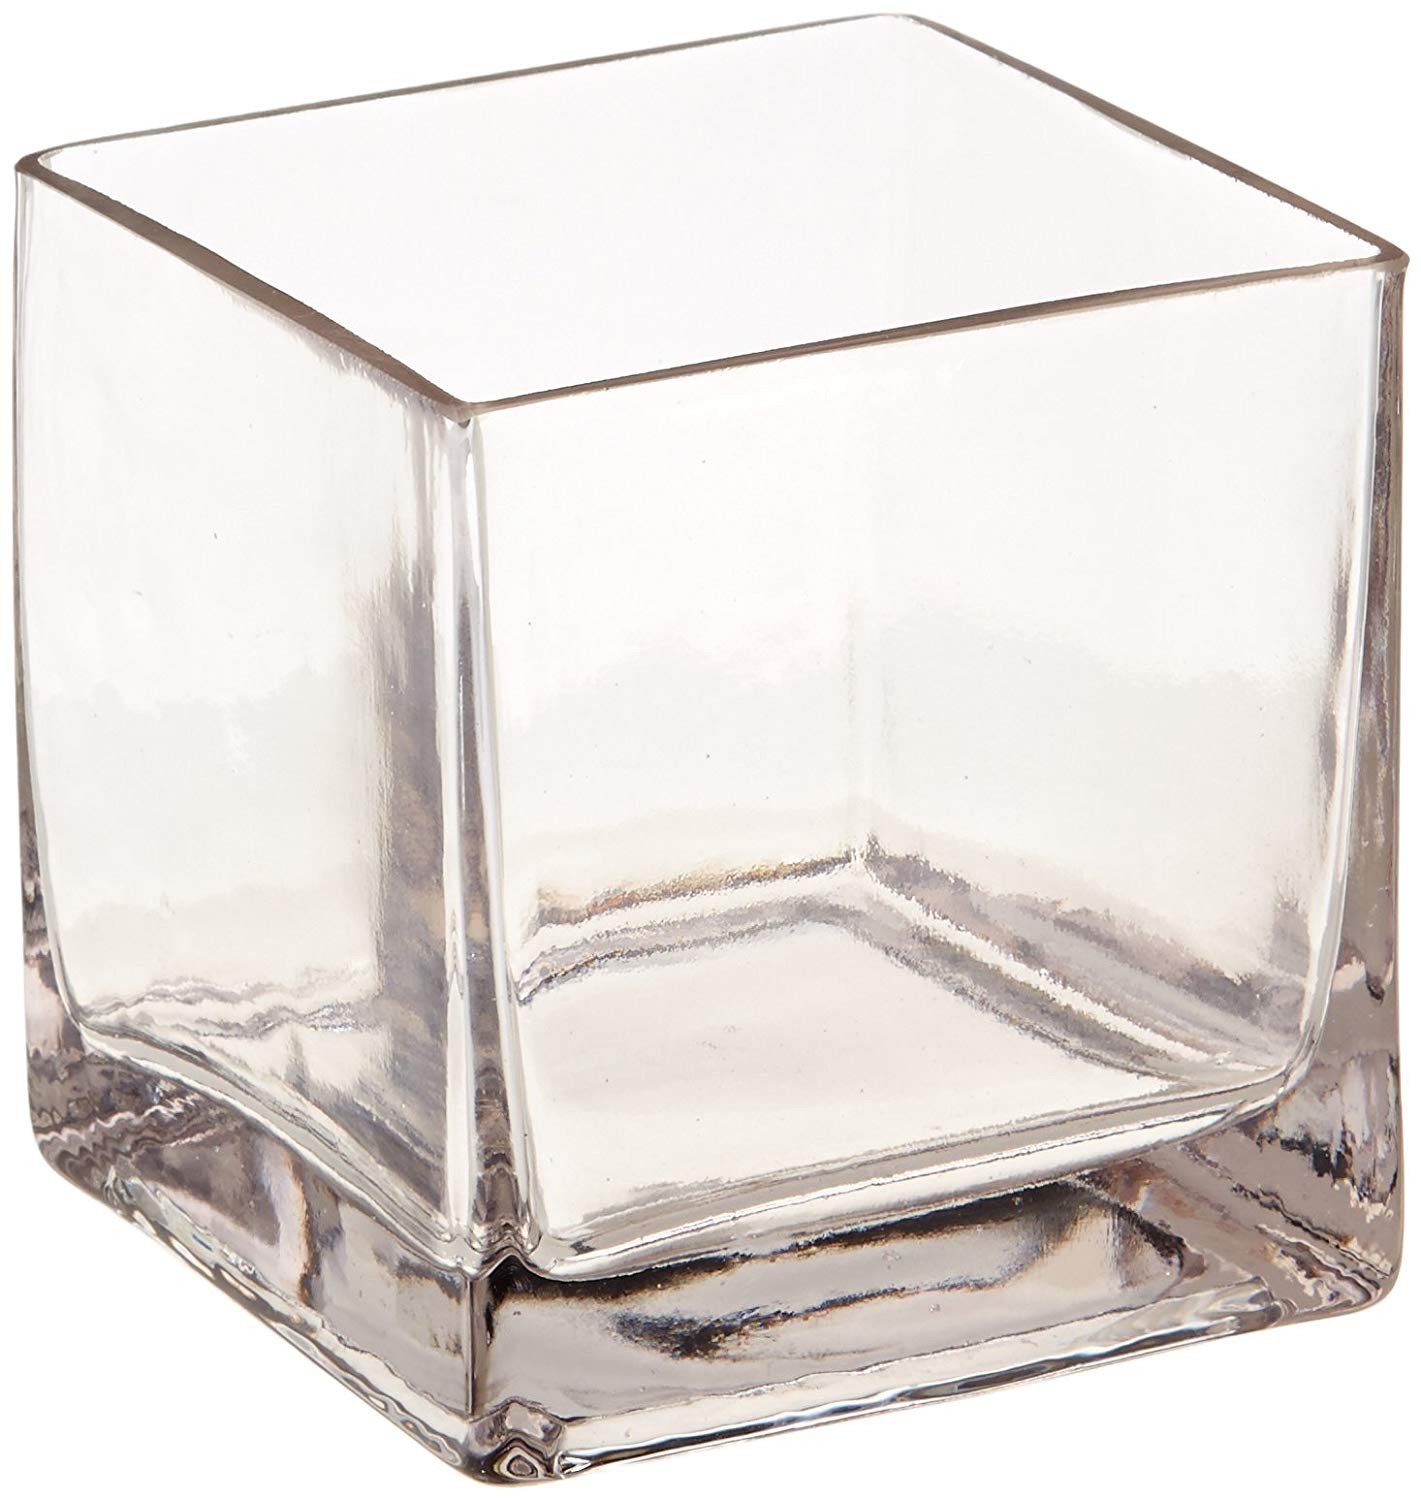 Clear Gem Vase Fillers Of Buy Cys Excel 12pc Clear Square Glass Vase Cube 5 Inch 5 X 5 X 5 Regarding Buy Cys Excel 12pc Clear Square Glass Vase Cube 5 Inch 5 X 5 X 5 Twelve Vases Online at Low Prices In India Amazon In